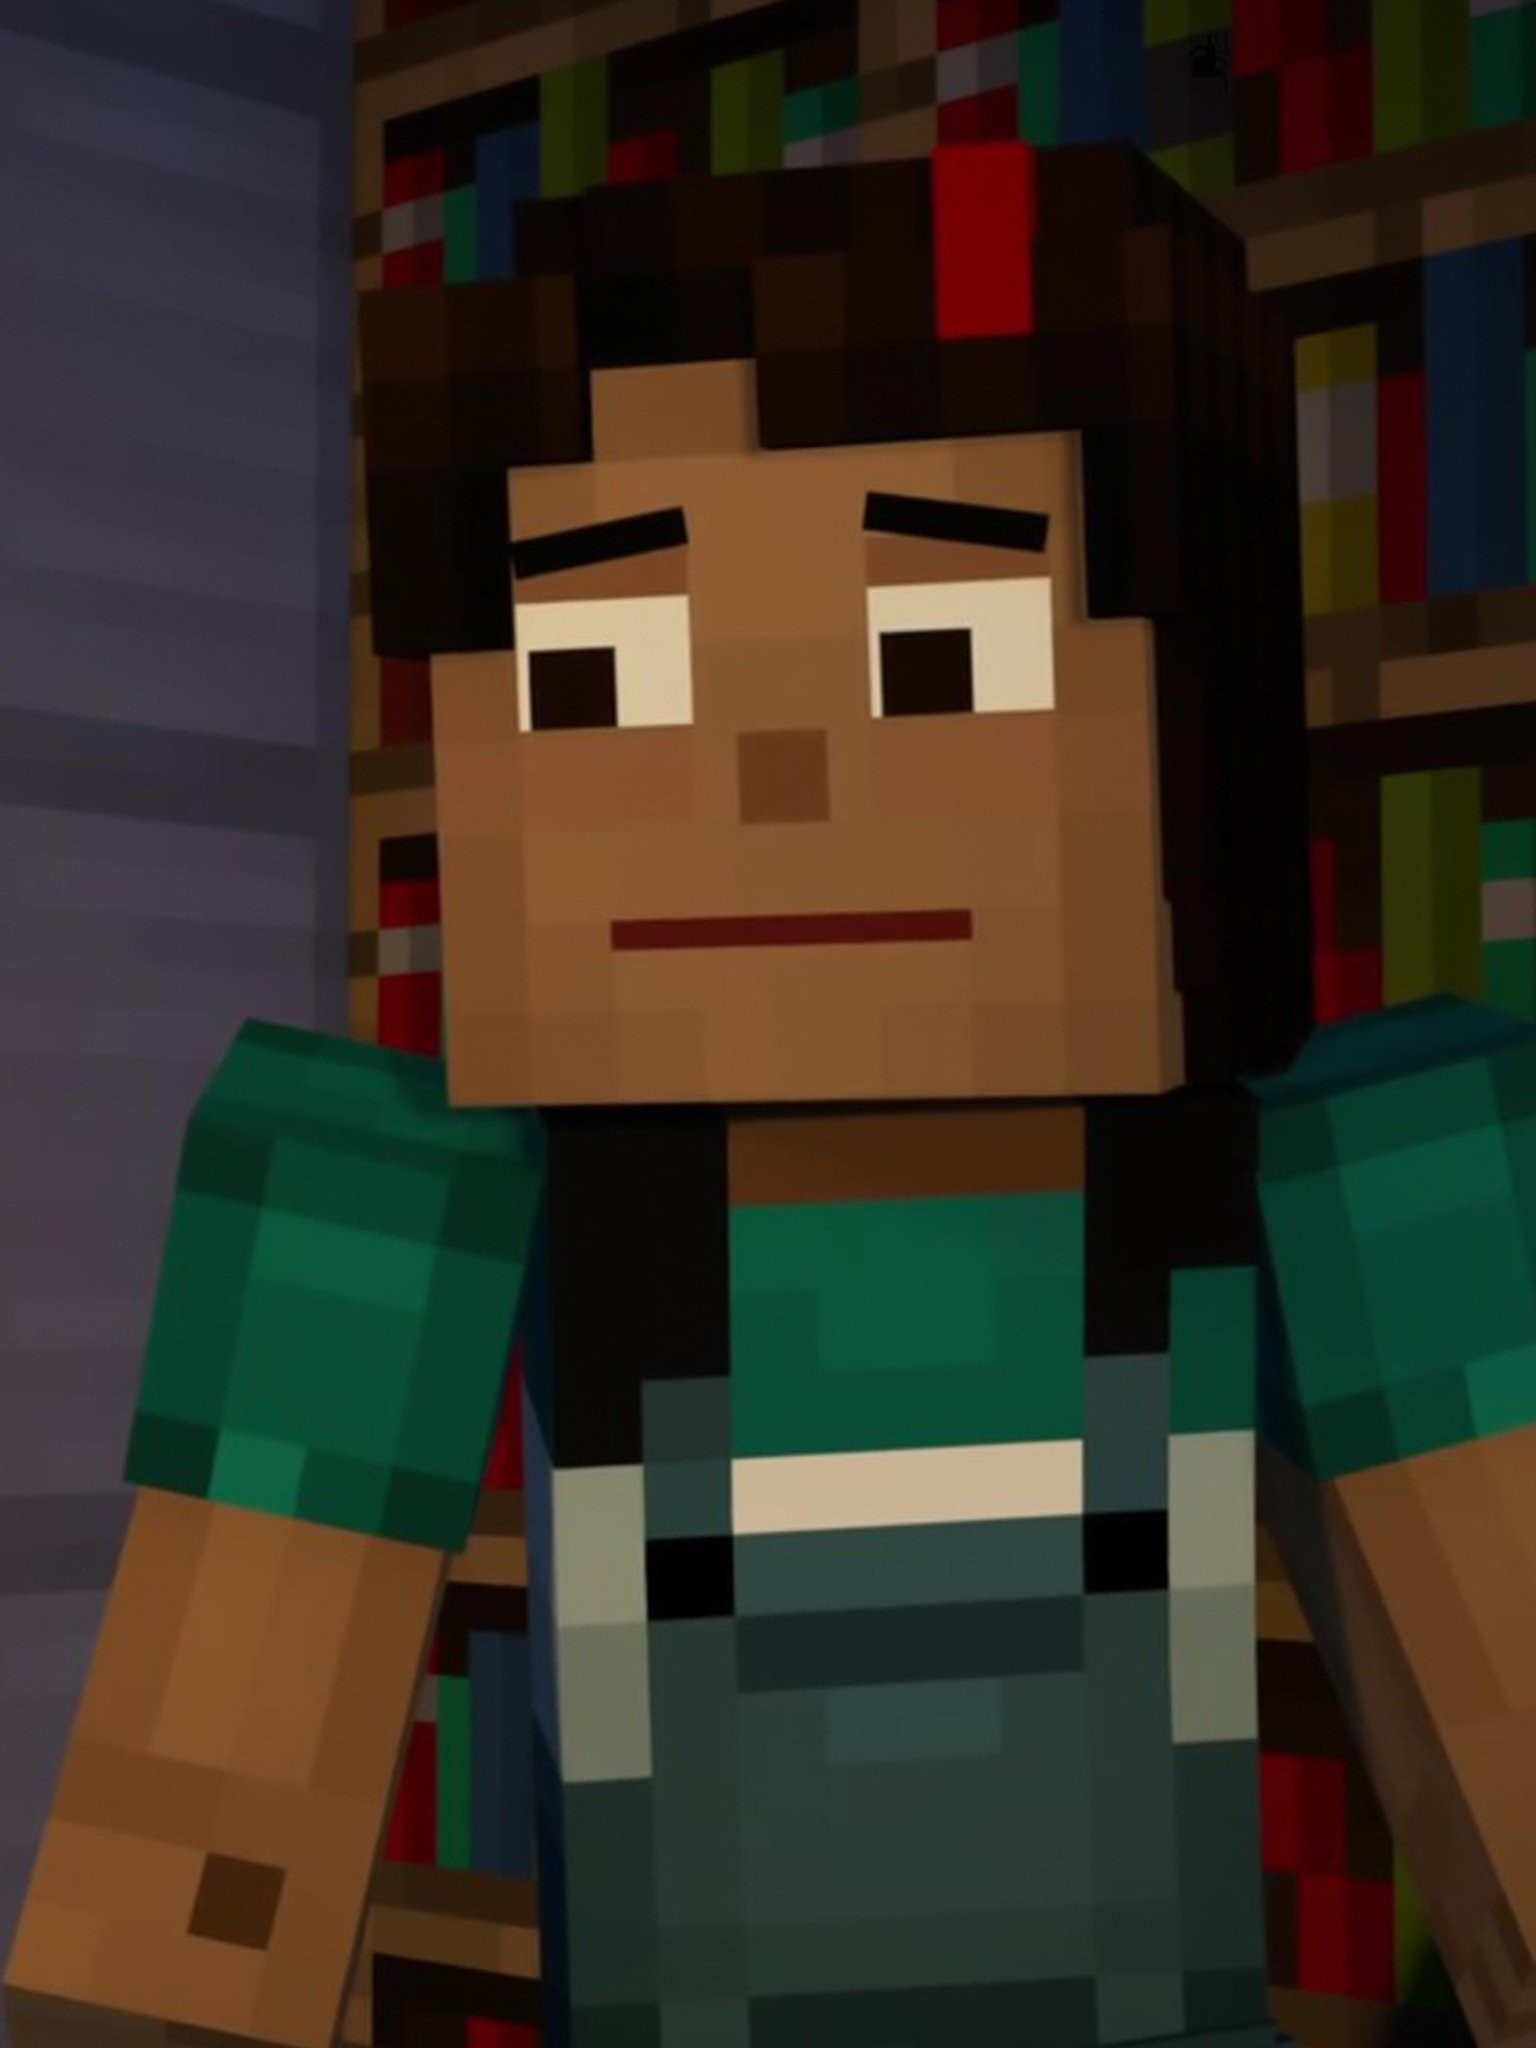 Minecraft: Story Mode Episode 3 trailer and release date details - Out now!